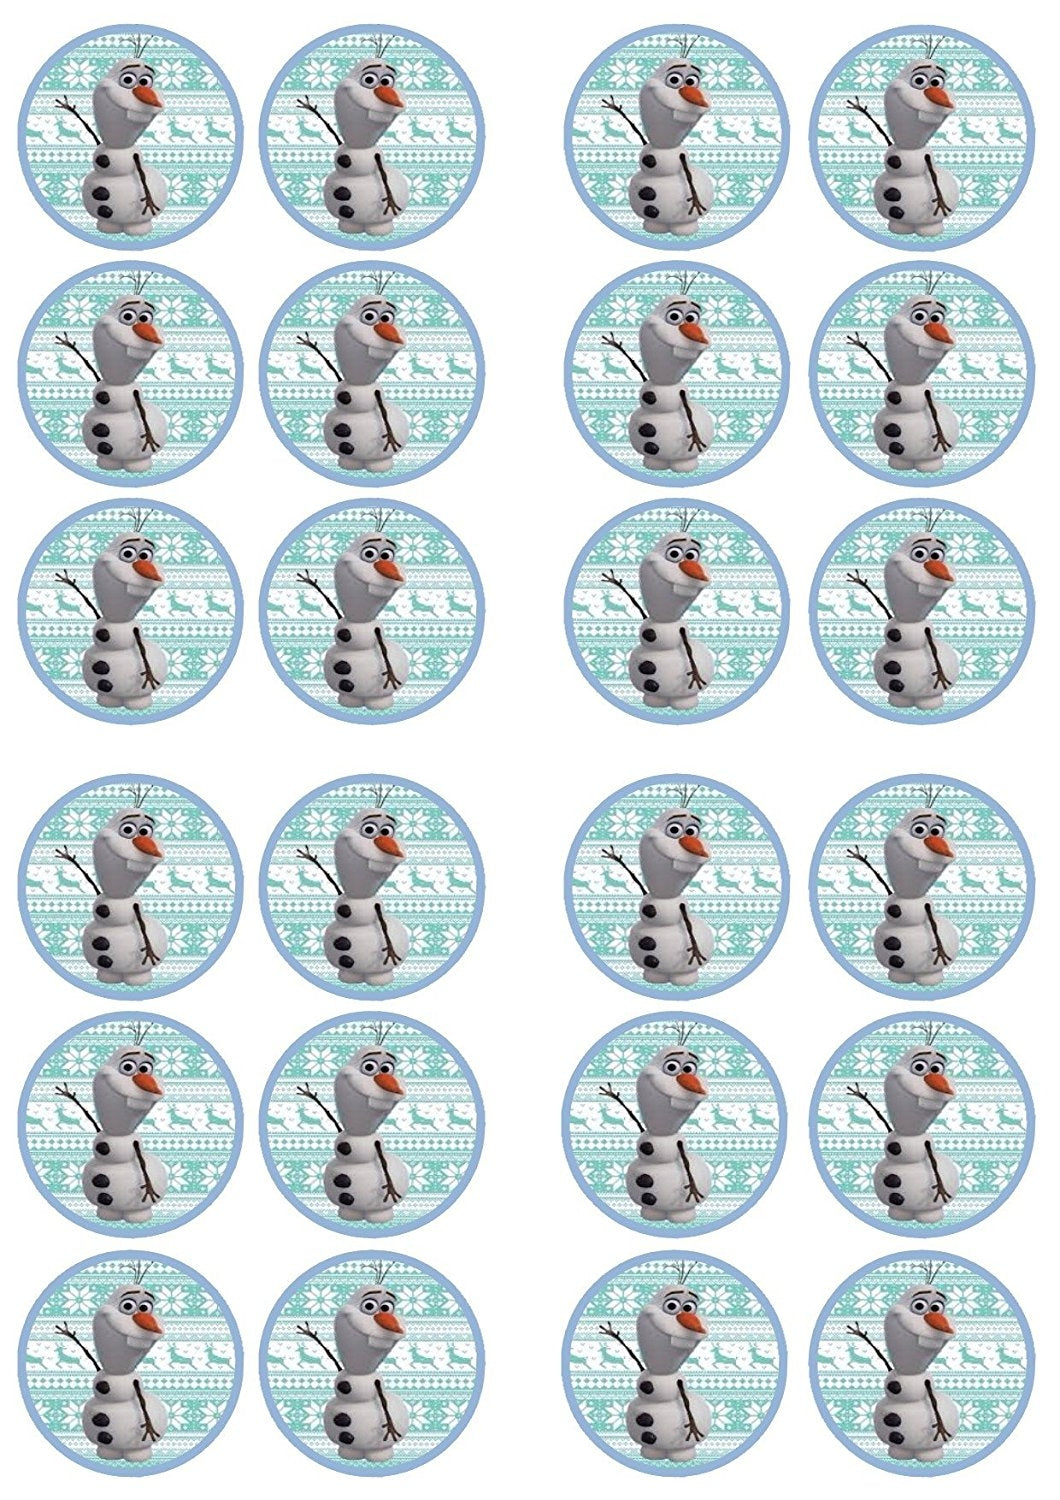 Disney Frozen Olaf Blue Snowflake Background Edible Cupcake Topper Images ABPID07353